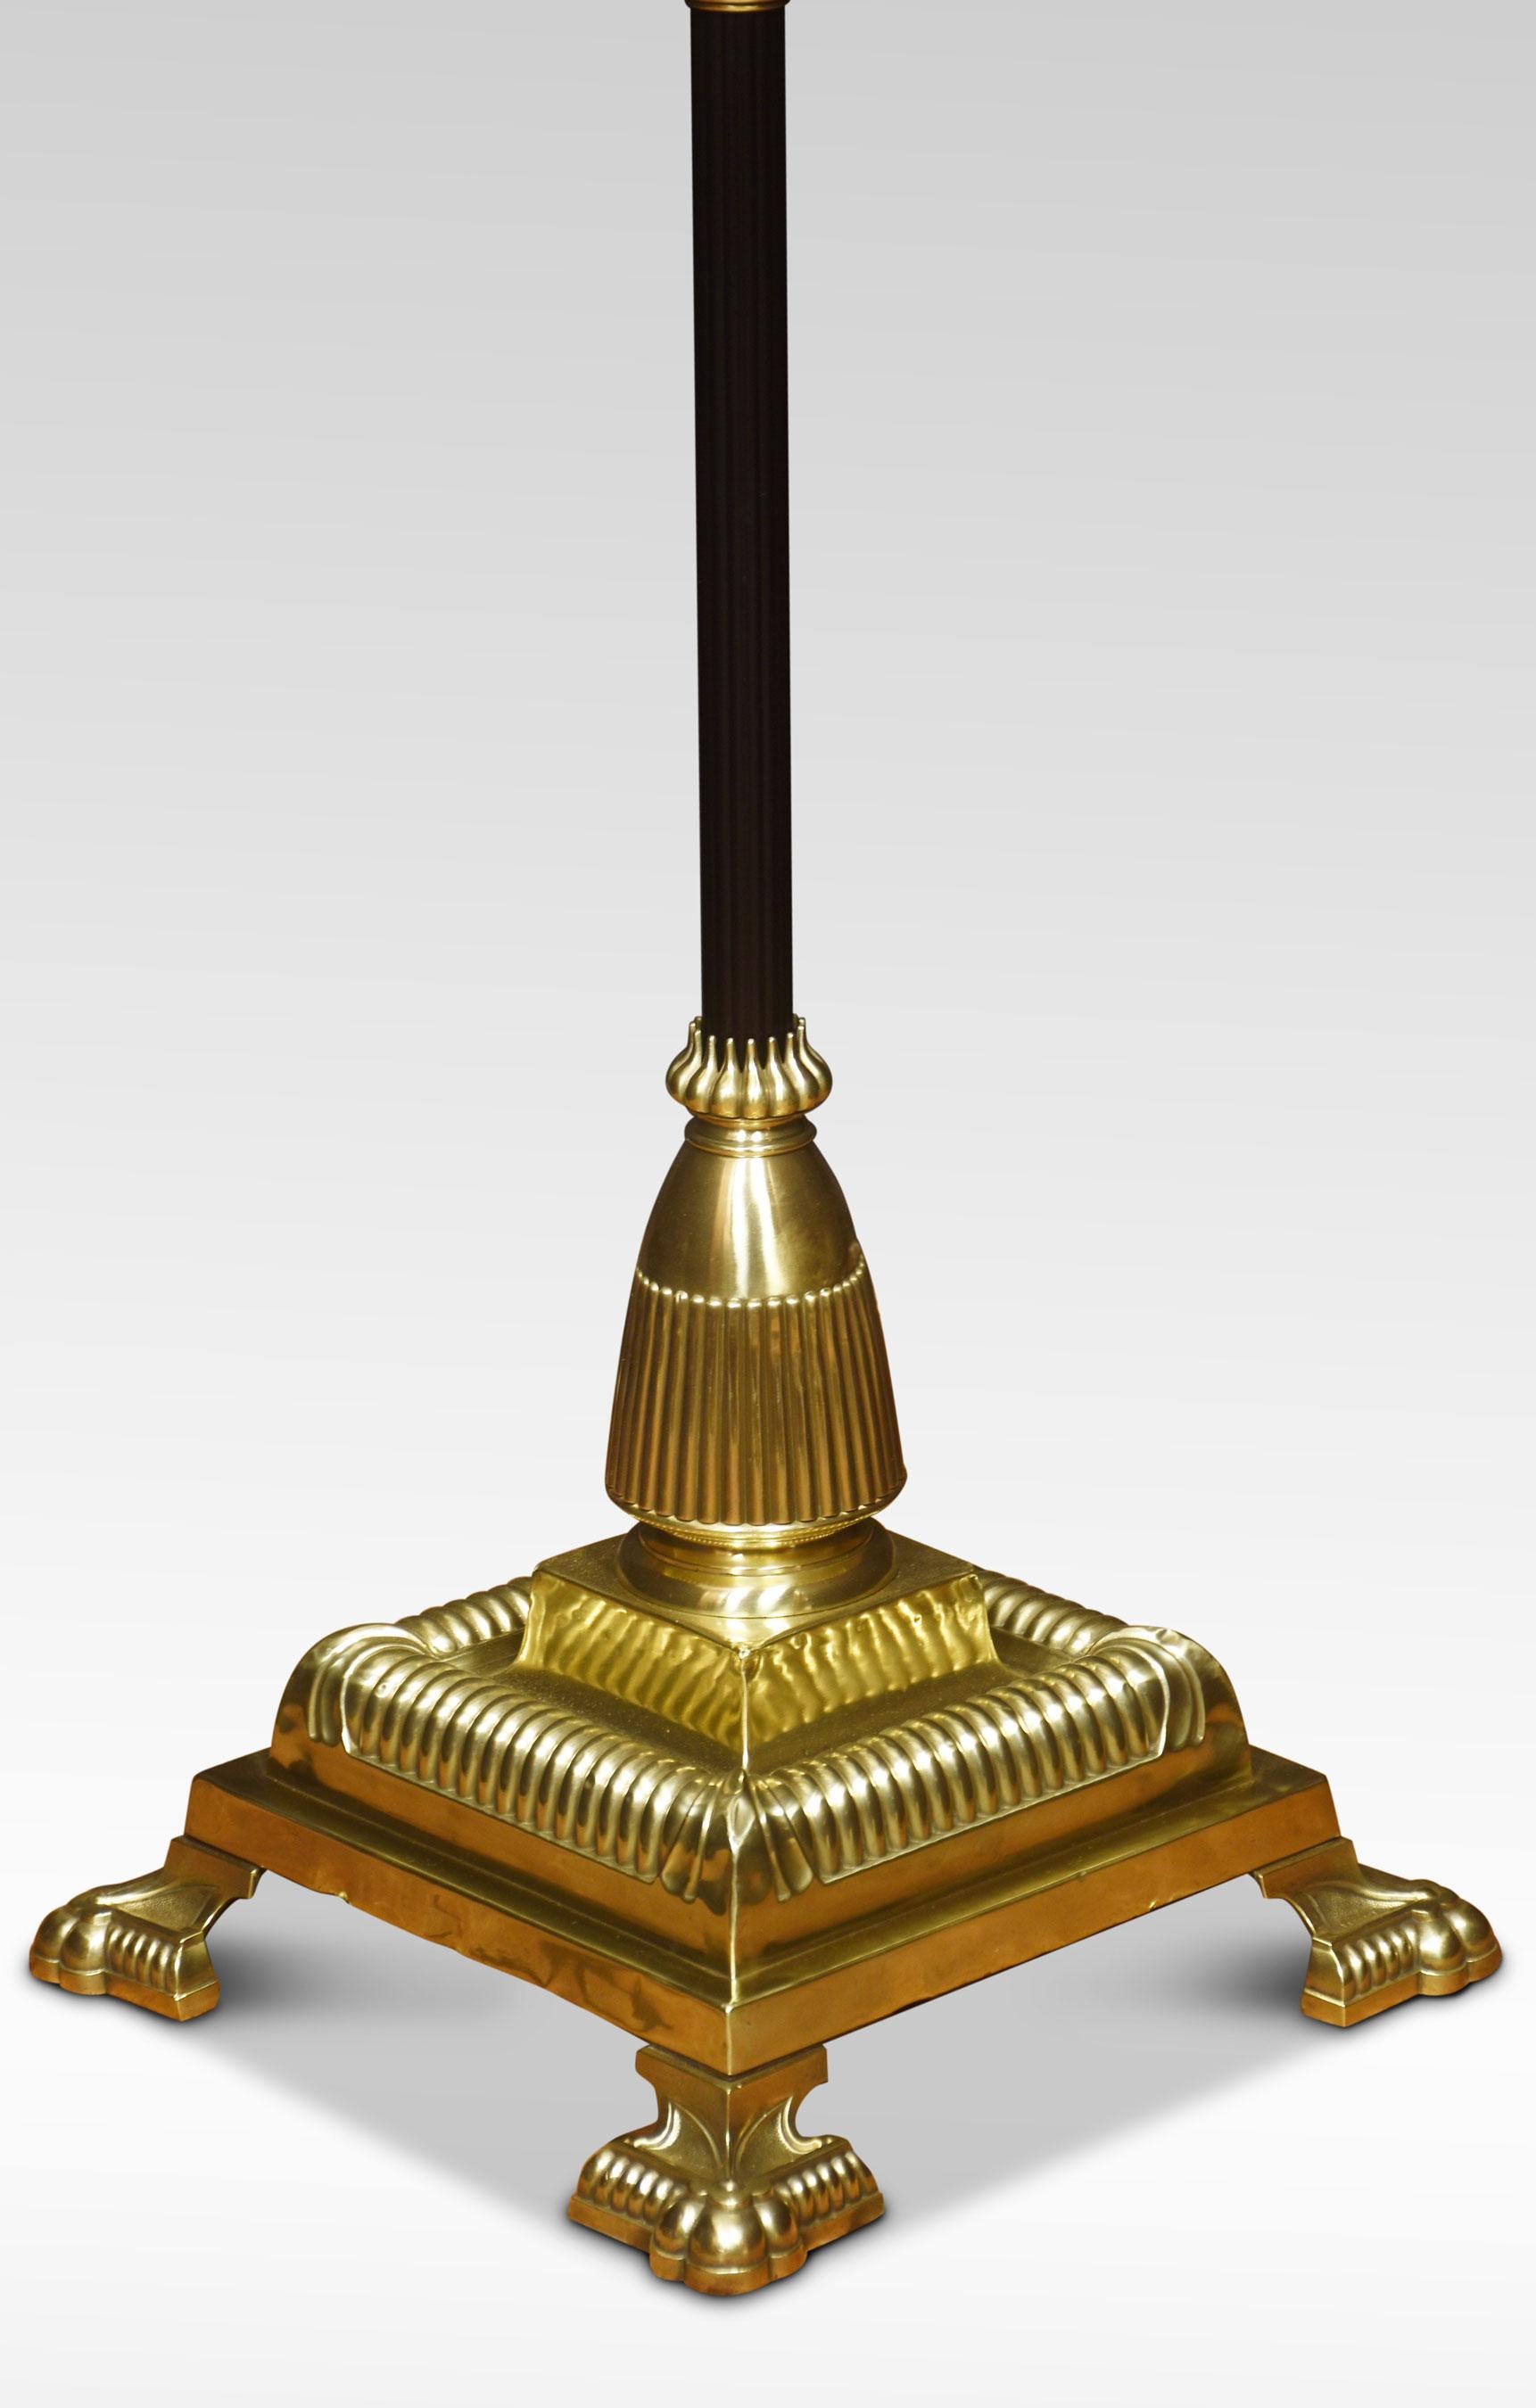 19th Century brass standard lamp. Having decorated oil reservoir above the ebonized Corinthian column and adjustable stem, on a large stepped square base with paw feet. The lamp has been rewired. Converted for electricity.
Dimensions
Height 56.5